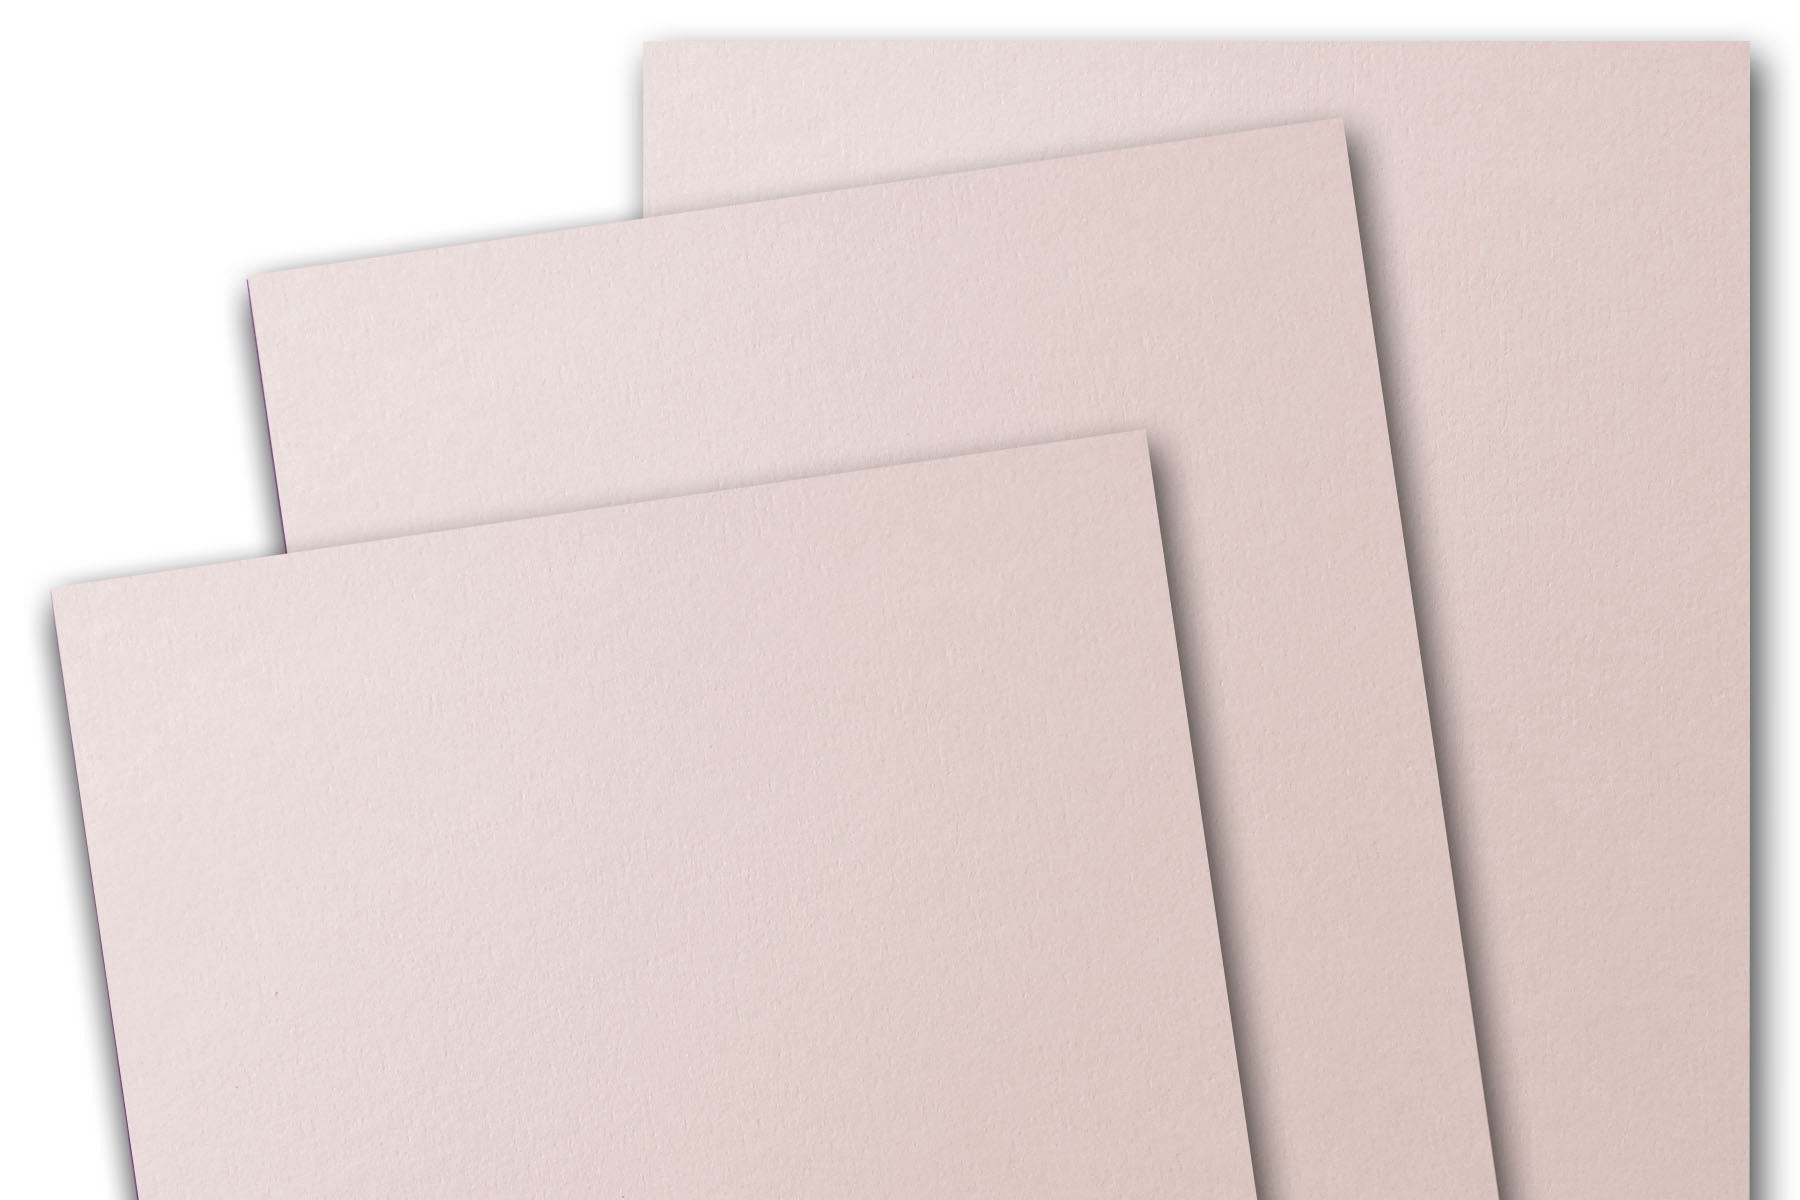 Clearance] BASIS COLORS - 8.5 x 11 PAPER - Ivory - 28/70 TEXT